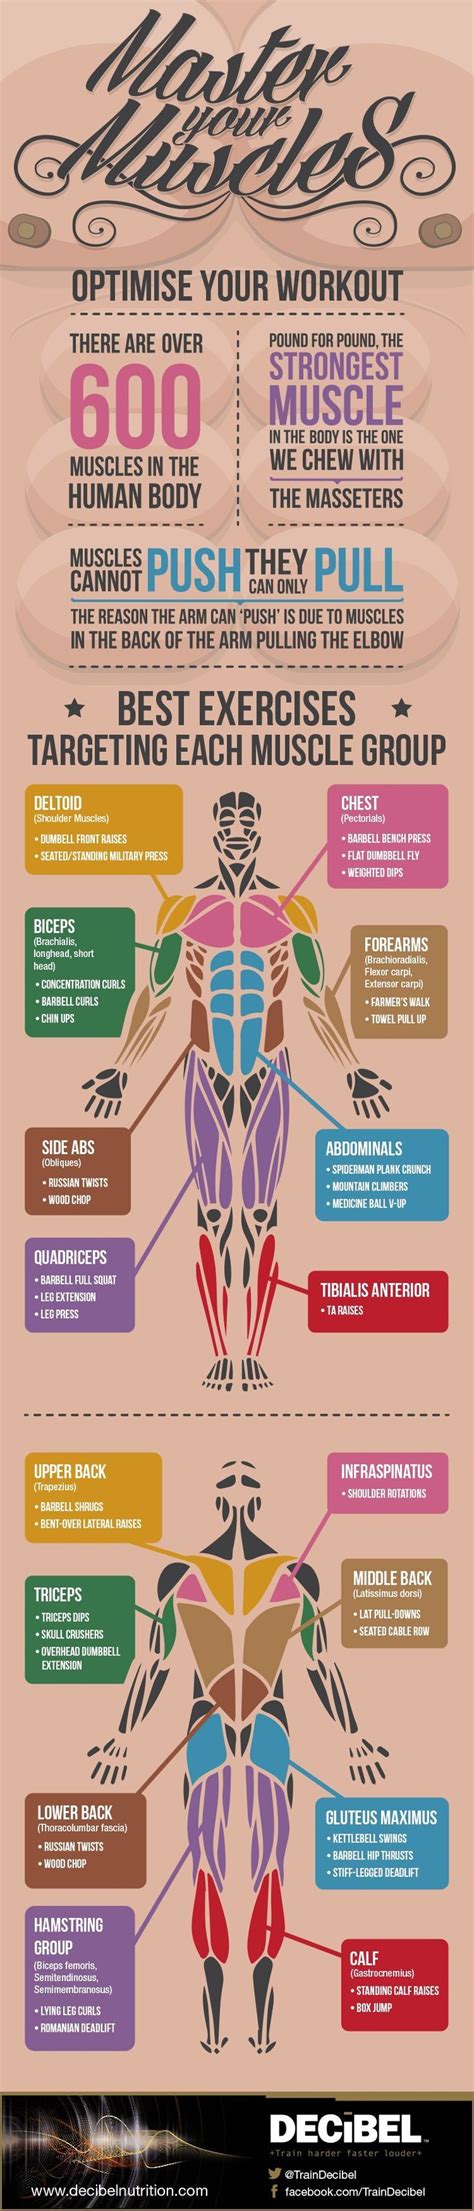 A muscle is a group of muscle tissues which contract together to produce a force. The 25+ best Body muscles names ideas on Pinterest | Muscle names, Muscle anatomy and Human ...